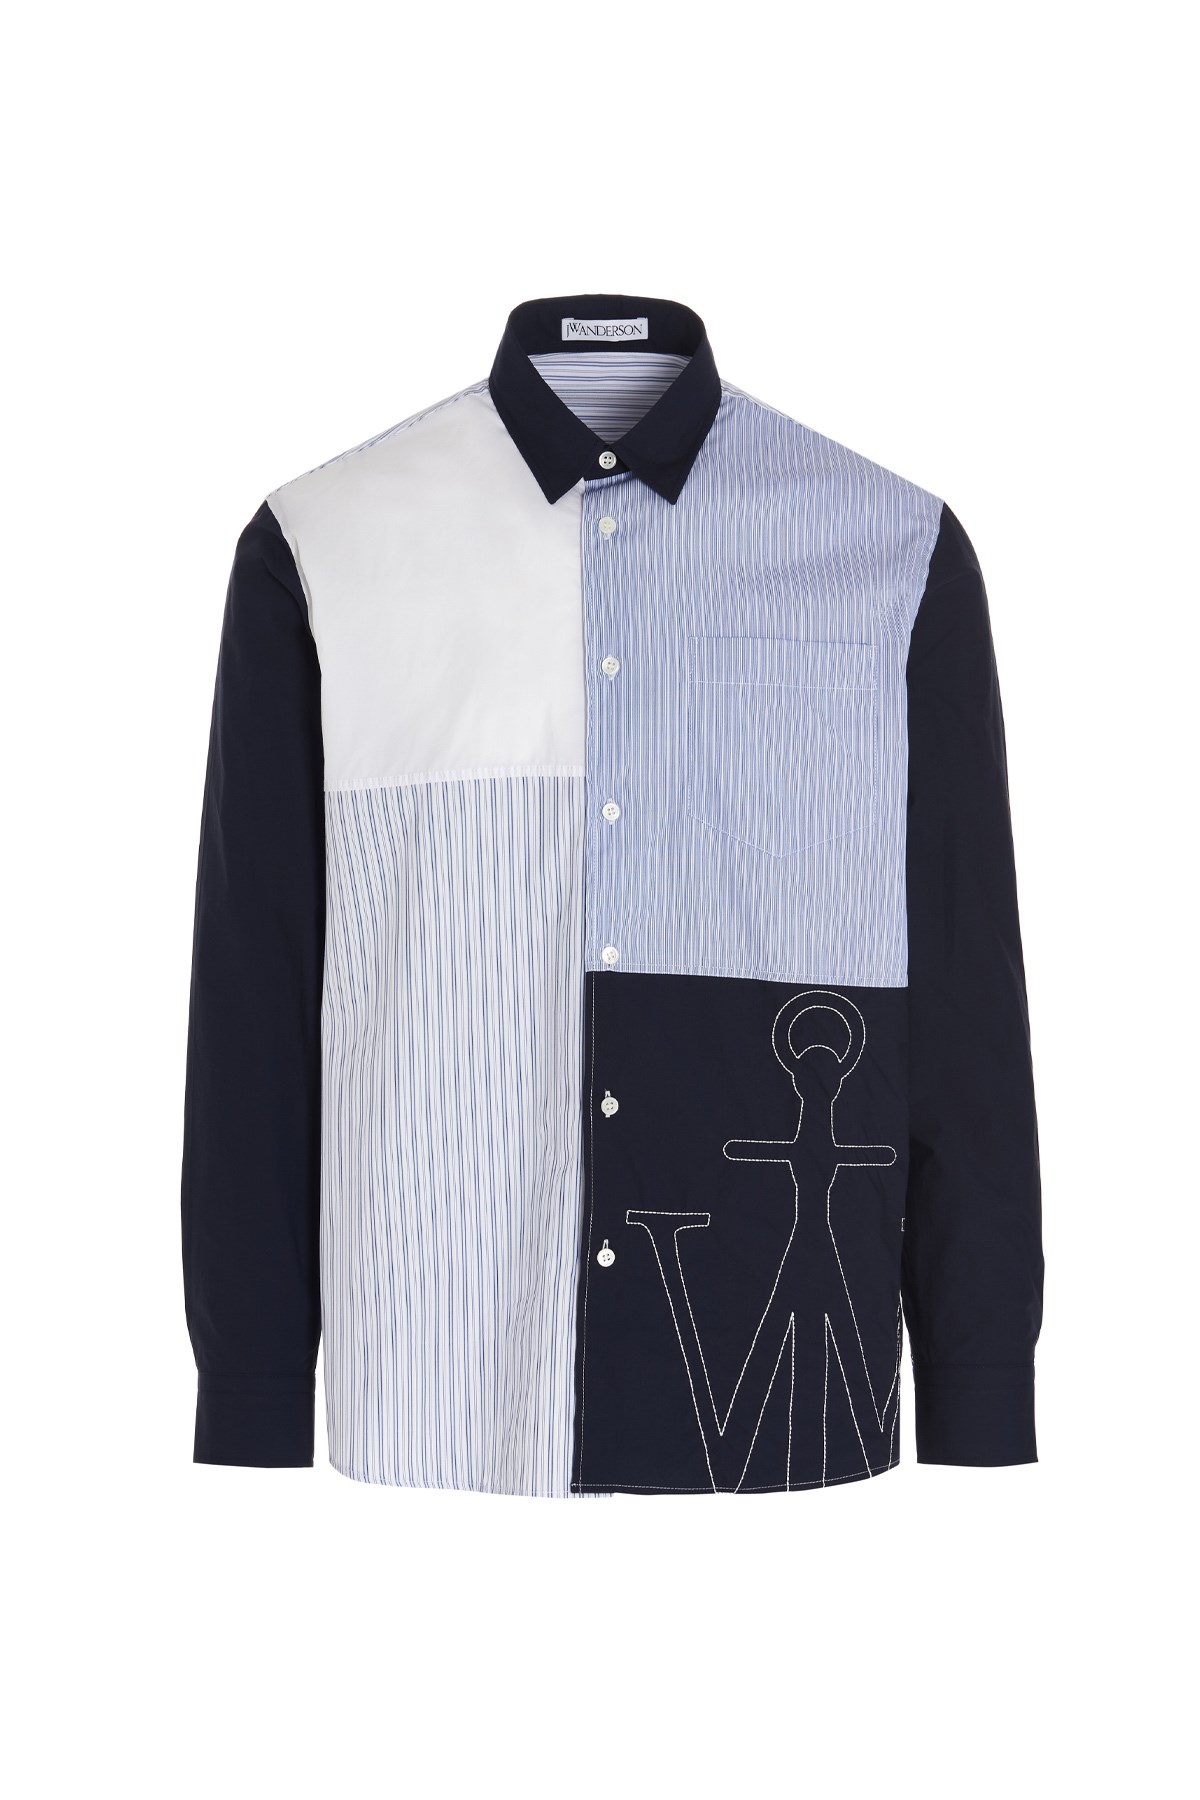 J.W.ANDERSON 'Relaxed Patchwork' Shirt